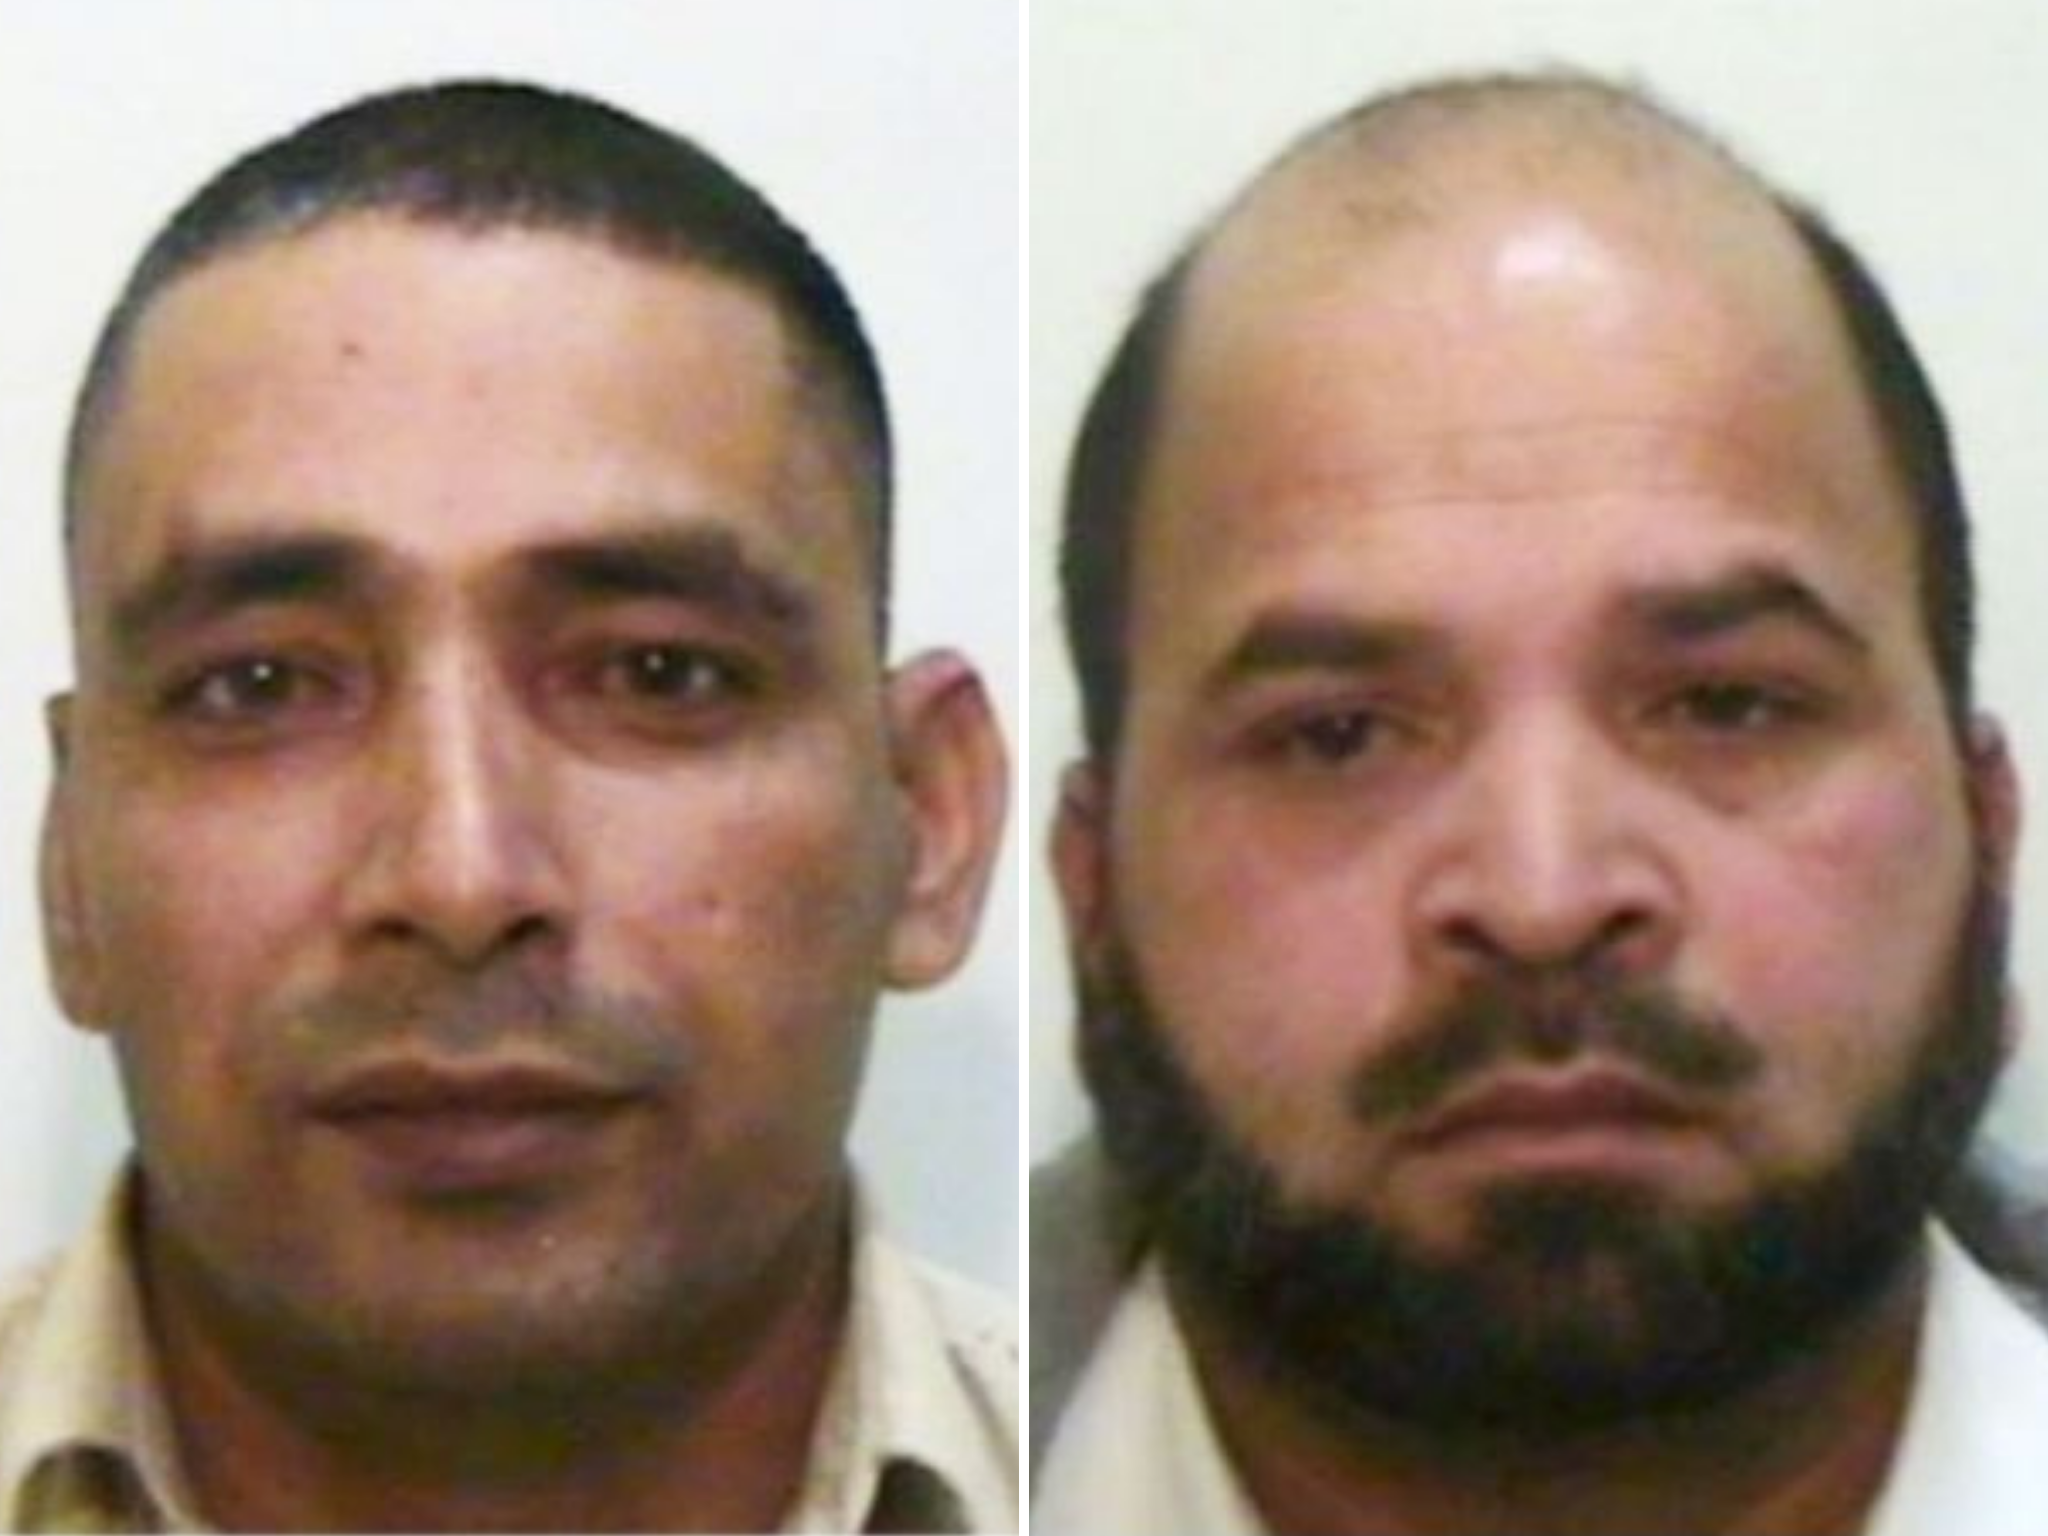 Adil Khan (left), 51 and Qari Abdul Rauf (right), 52, members of a Rochdale grooming gang, are fighting deportation from the UK to Pakistan.